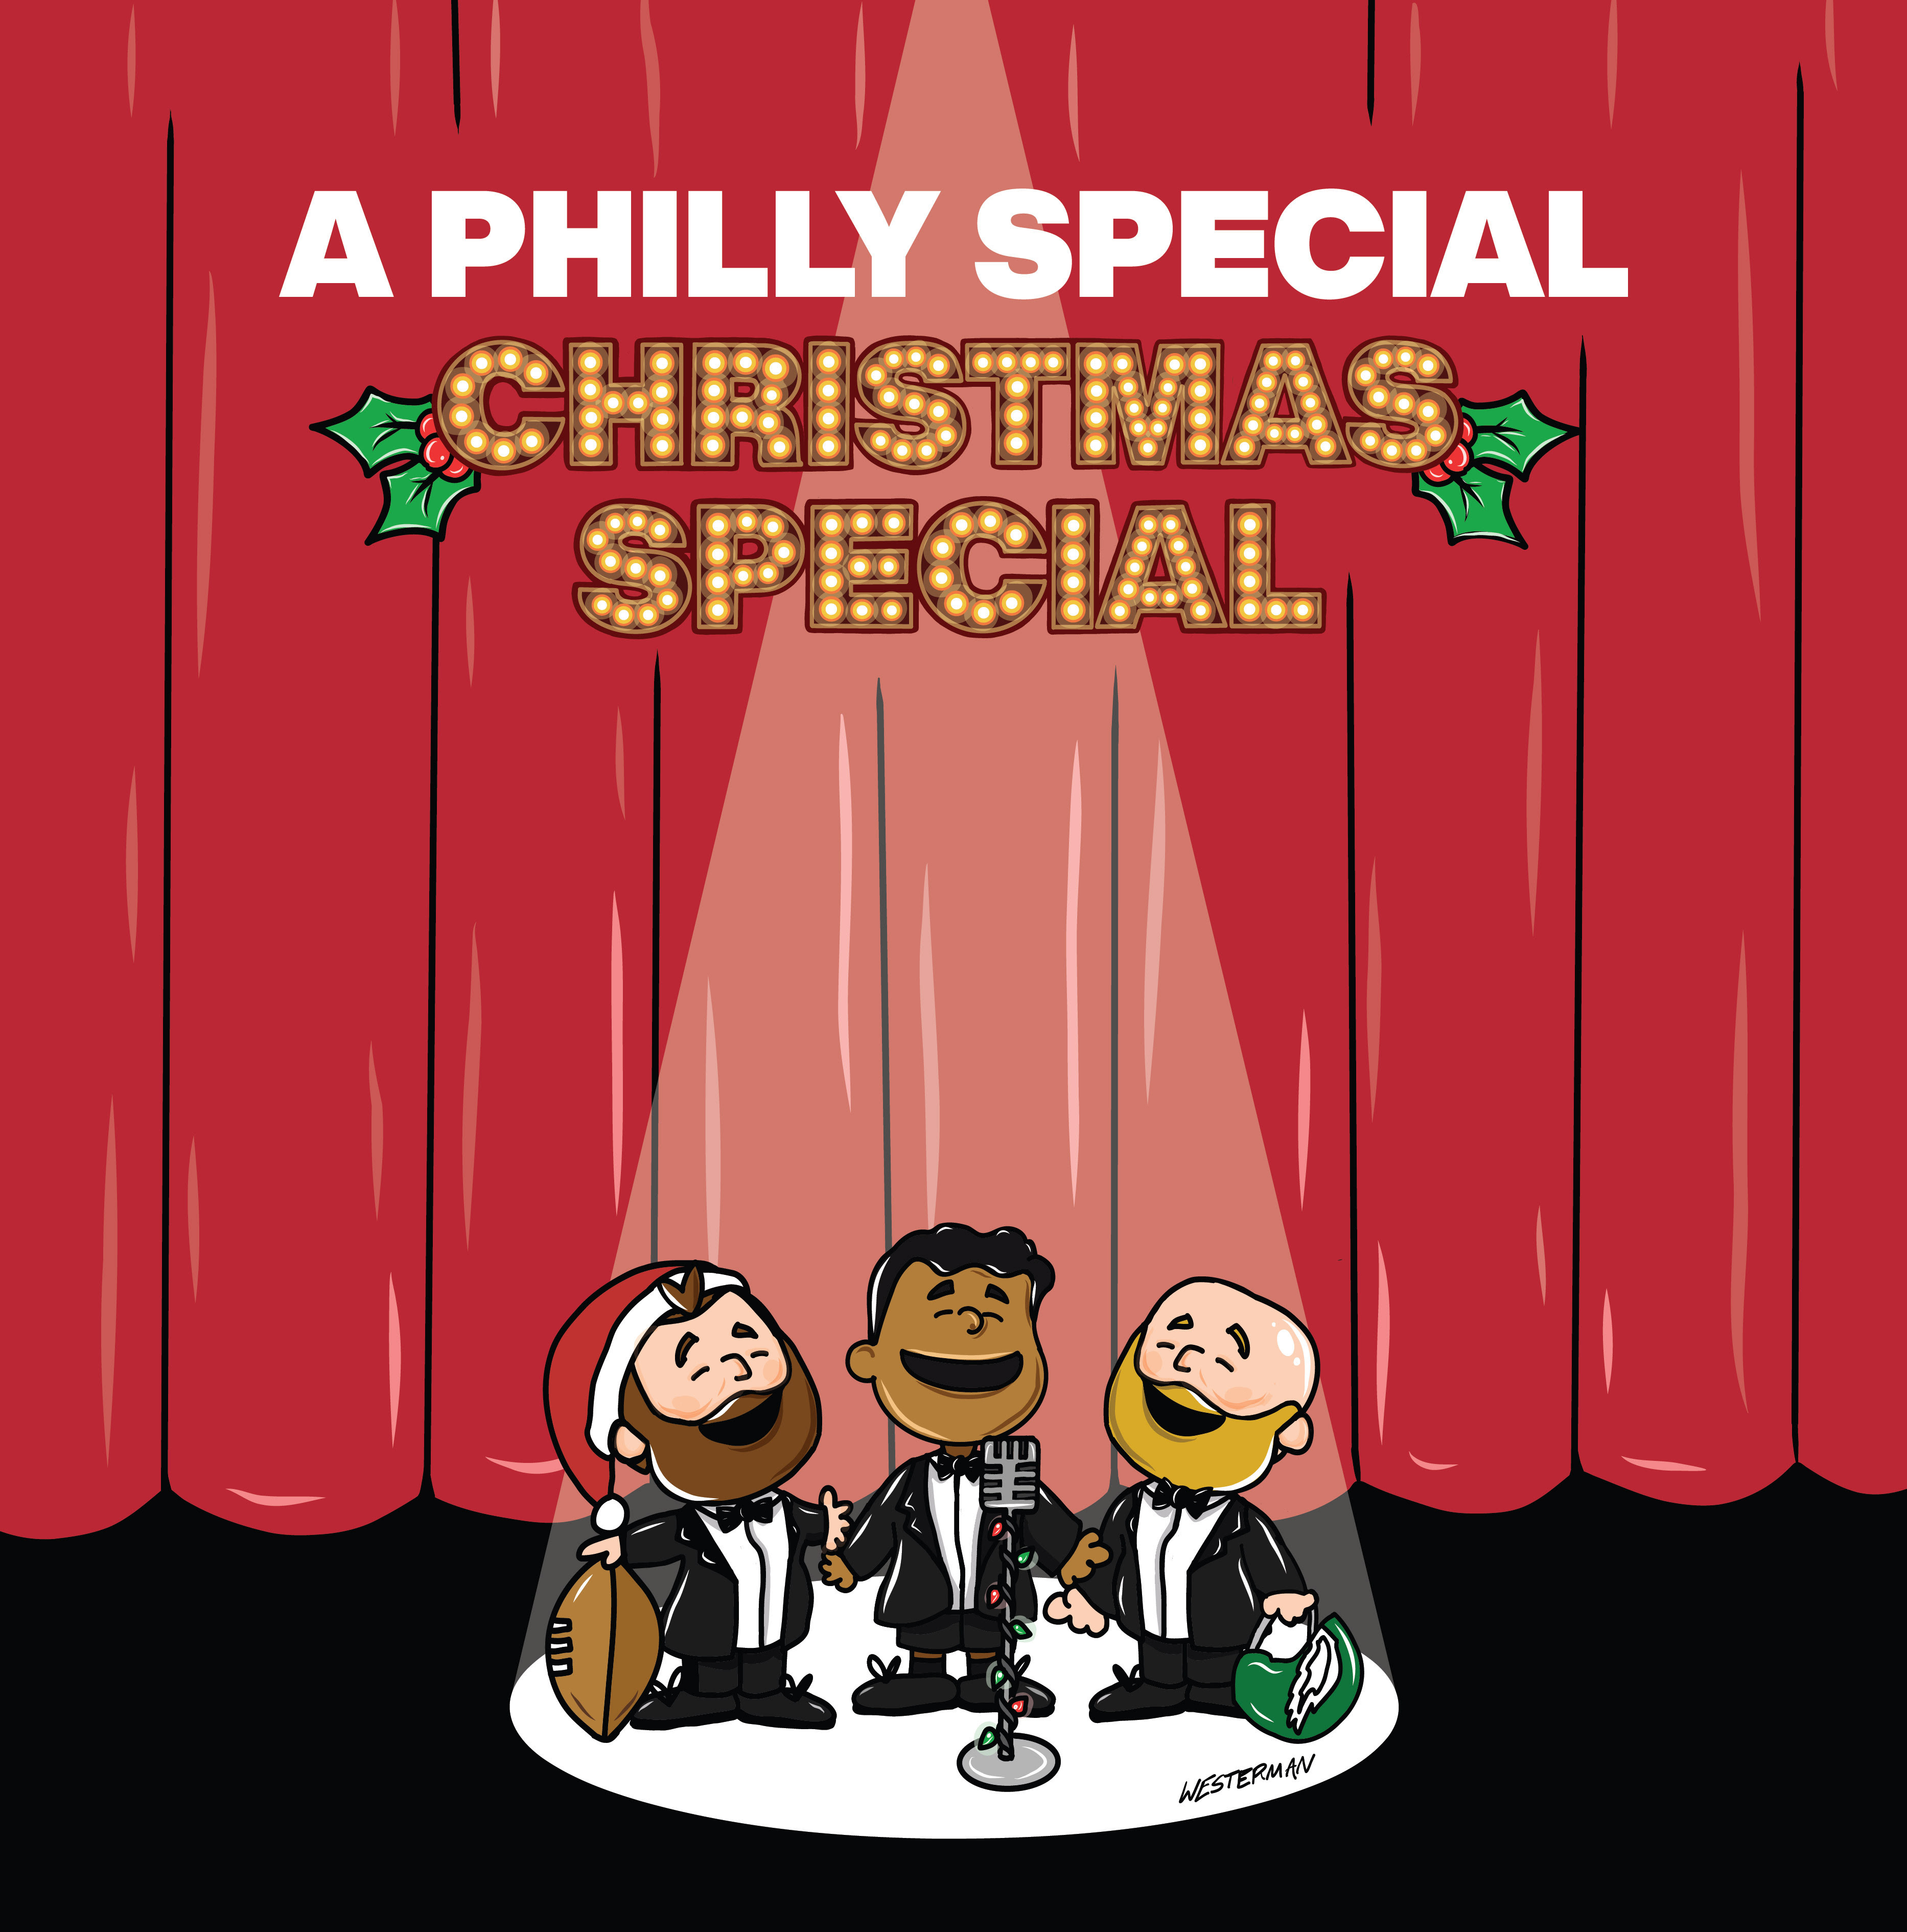  A PHILLY SPECIAL CHRISTMAS SPECIAL STOP MOTION ANIMATED SPECIAL TO PREMIERE VIA YOUTUBE THANKSGIVING NIGHT AT 8 PM EST